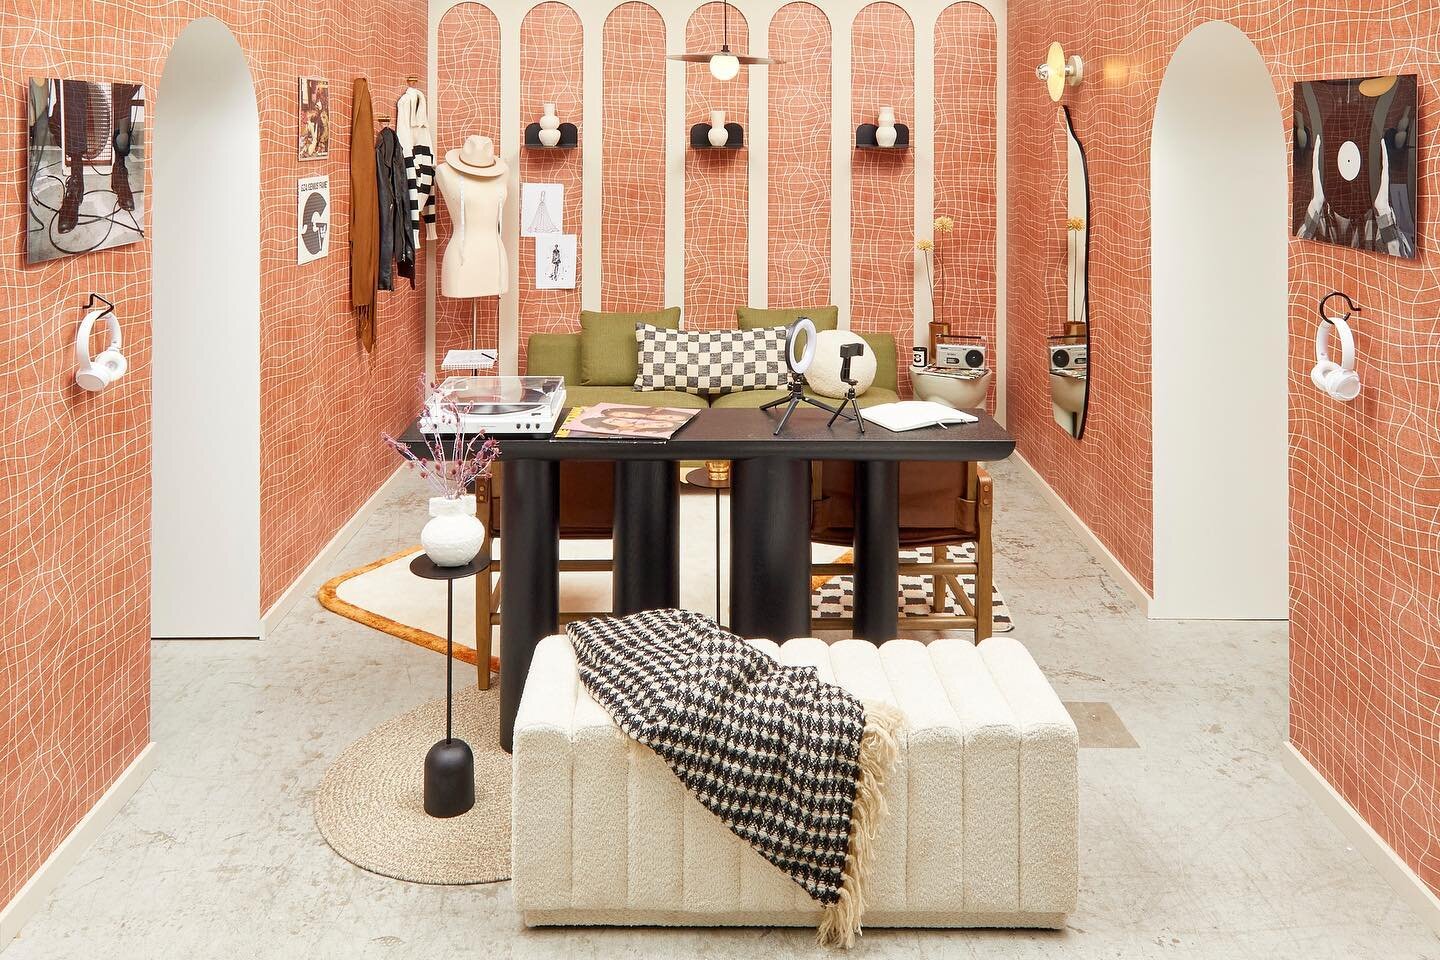 It&rsquo;s the last weekend for our @apartmenttherapy SmallCool NYC pop-up at Industry City in Brooklyn! Our soulful space was inspired by our Chill Studio Vibes playlist and everything we selected is shoppable on the Apartment Therapy website. You c